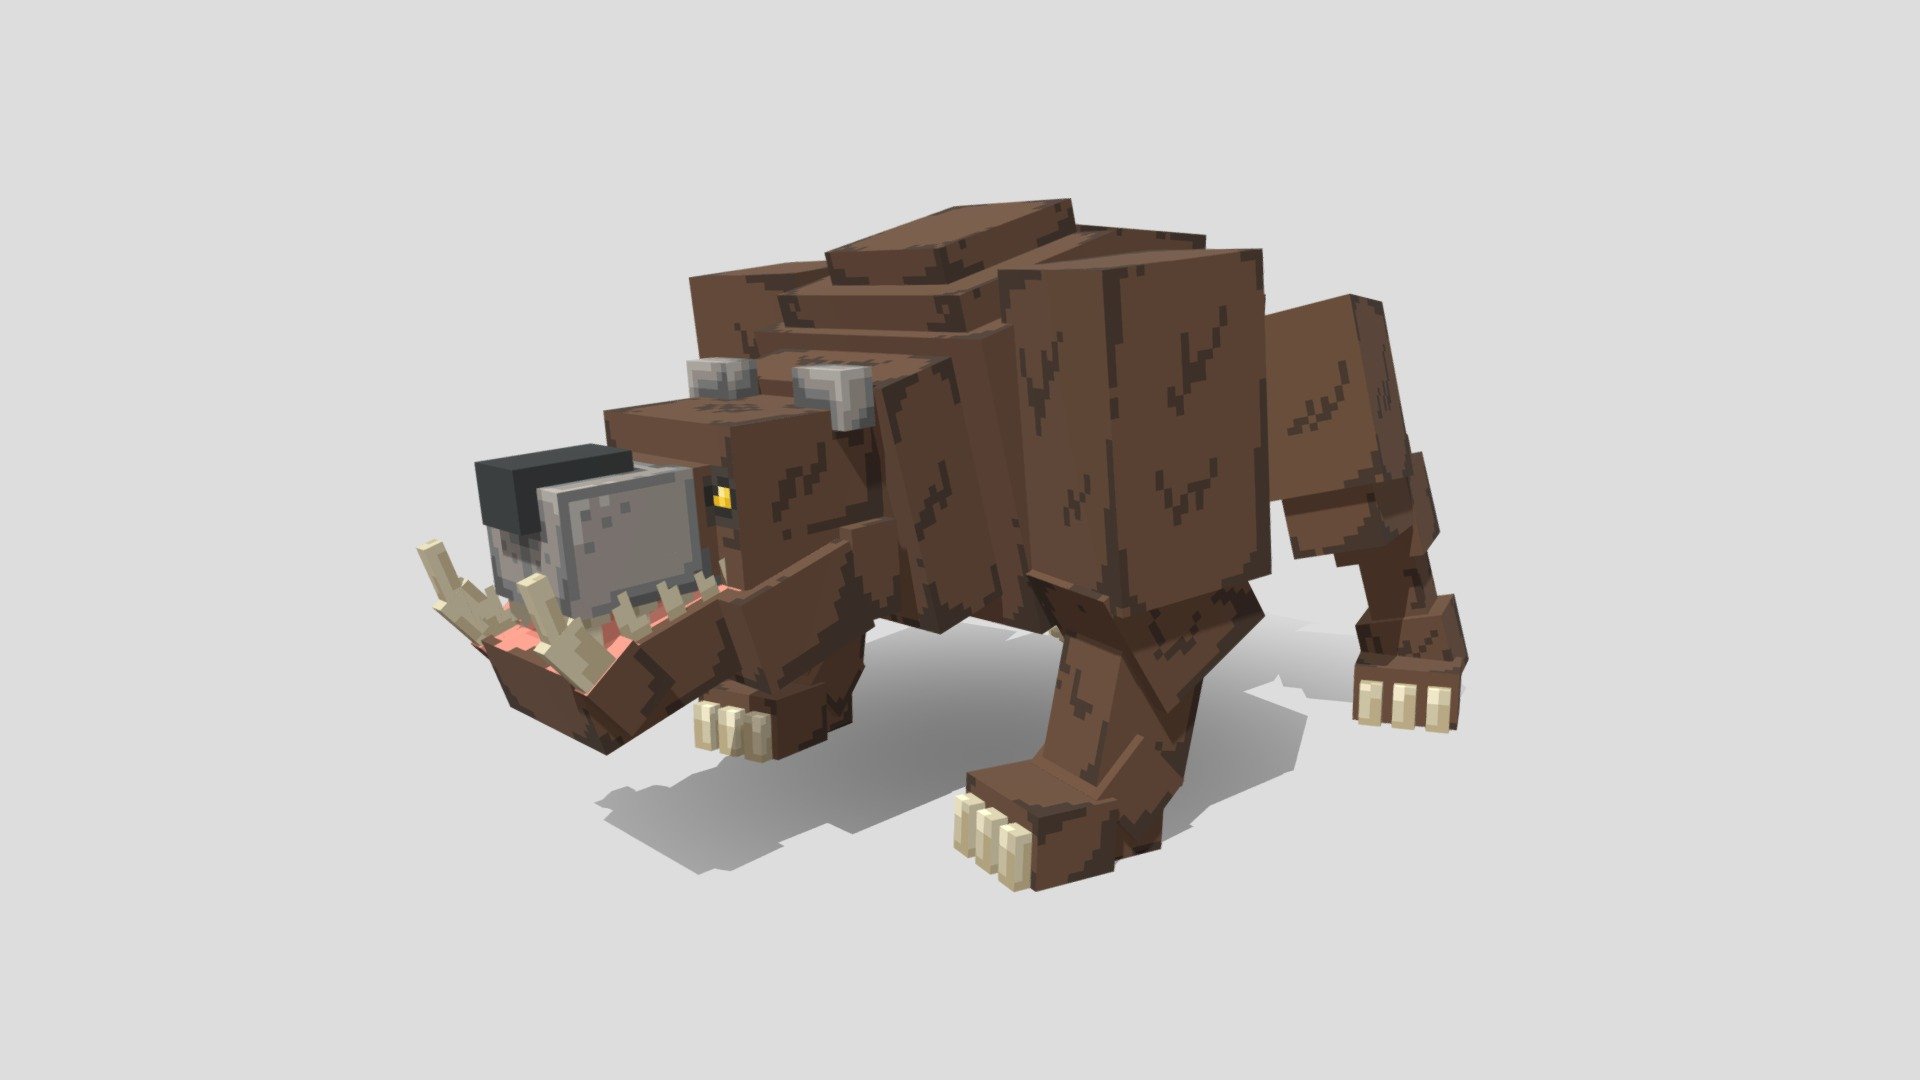 Were-Bear / Wolf Bear Beast ready for ModelEngine and Minecraft Bedrock. This Blockbench model works great as a custom Minecraft mob and has several animations to bring it to life.

Follow my work over at https://www.youtube.com/c/artsbykev where I create custom Minecraft models and teach you how to animate, texture and model your very own unique minecraft mobs using Blockbench.

This Animated Bear Wolf mob can be put on your Java Minecraft Server using ModelEngines. Customize your survival and rpg worlds with uniquely made 3D mobs and bosses.

Business Inquiries are sent to: business.artsbykev@gmail.com

Reach me via https://www.twitter.com/artsbykev - Were-Bear Beast - [ ModelEngine Ready ] - 3D model by ArtsByKev 3d model